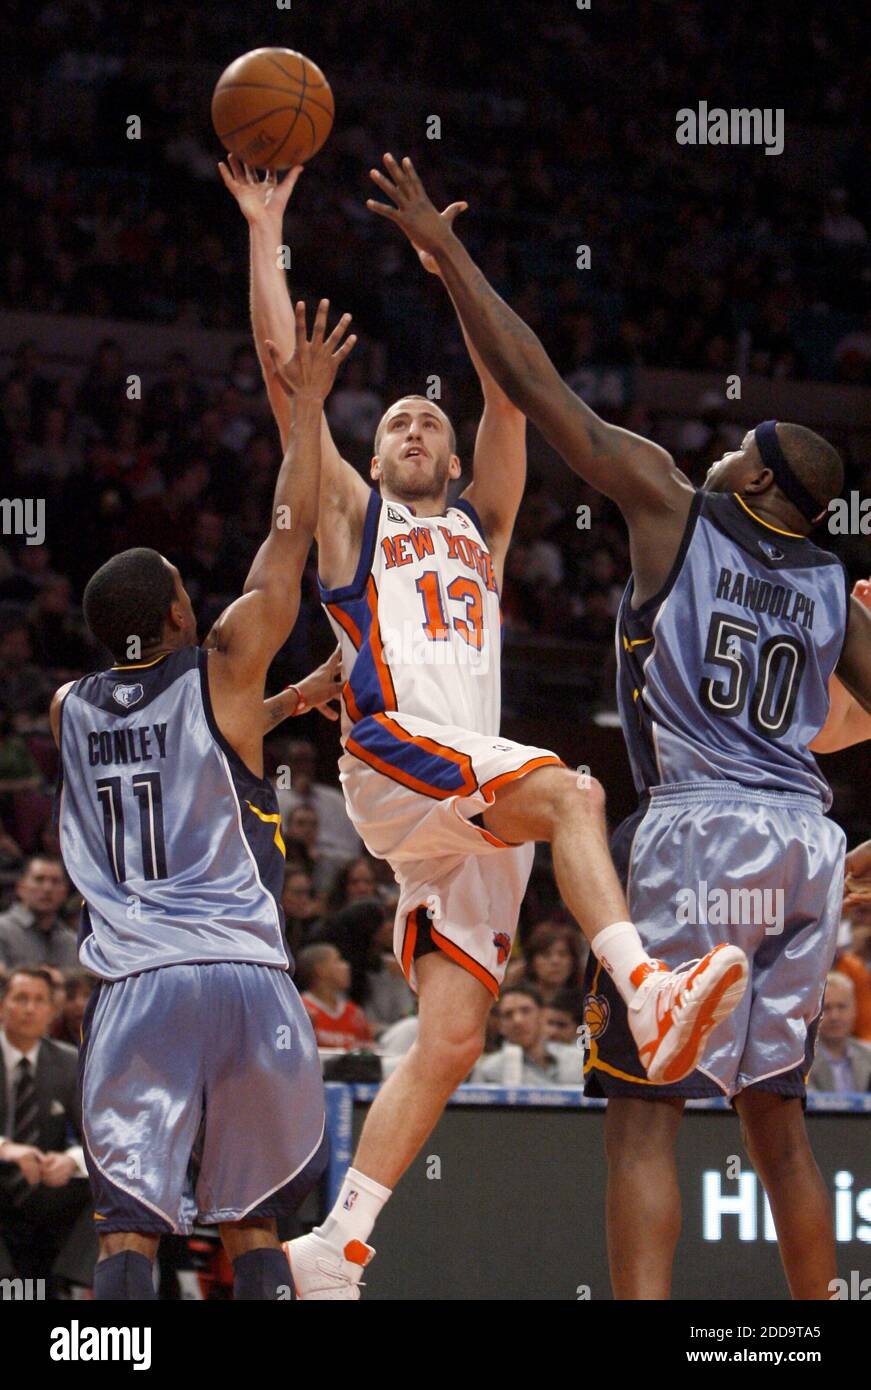 NO FILM, NO VIDEO, NO TV, NO DOCUMENTARY - New York Knicks' Sergio Rodriguez (13) shoots against Memphis Grizzlies' Mike Conley (left) and Zach Randolph during NBA basketball action at Madison Square Garden in New York on Saturday, February 27, 2010. Photo by Jason DeCrow/Newsday/MCT/Cameleon/ABACAPRESS.COM Stock Photo